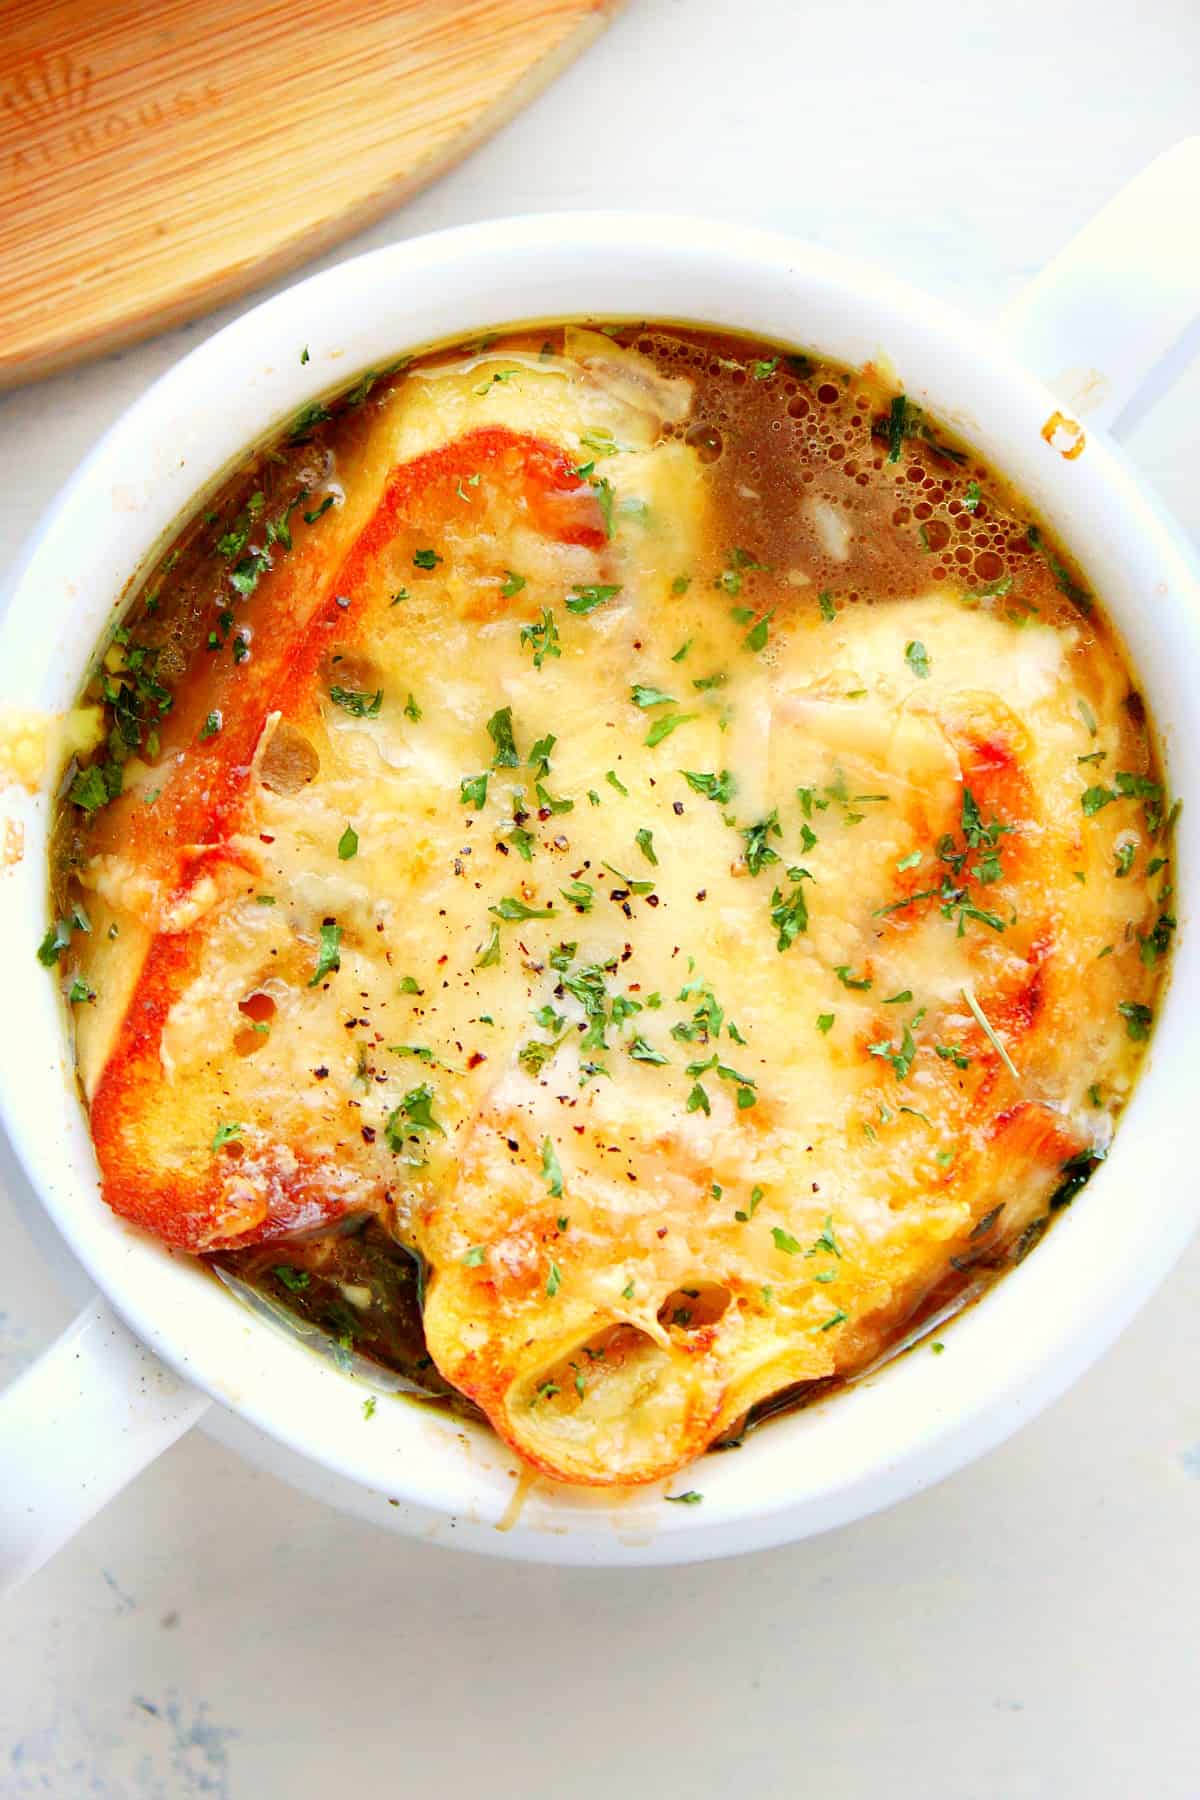 French onion soup with cheesy toast in a bowl.